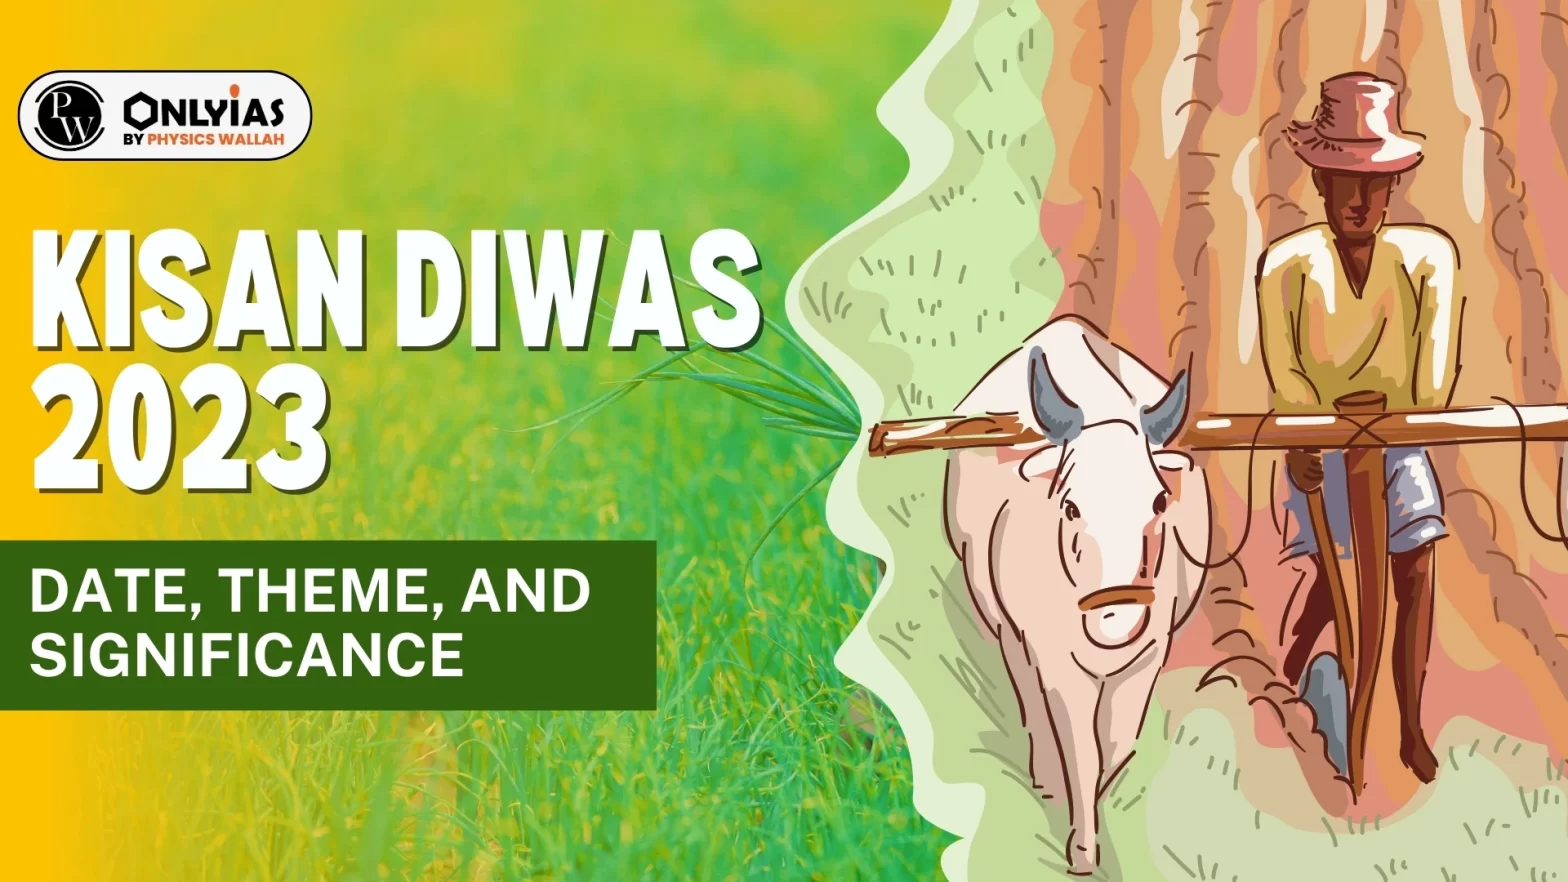 Kisan Diwas 2023: Date, Theme, and Significance